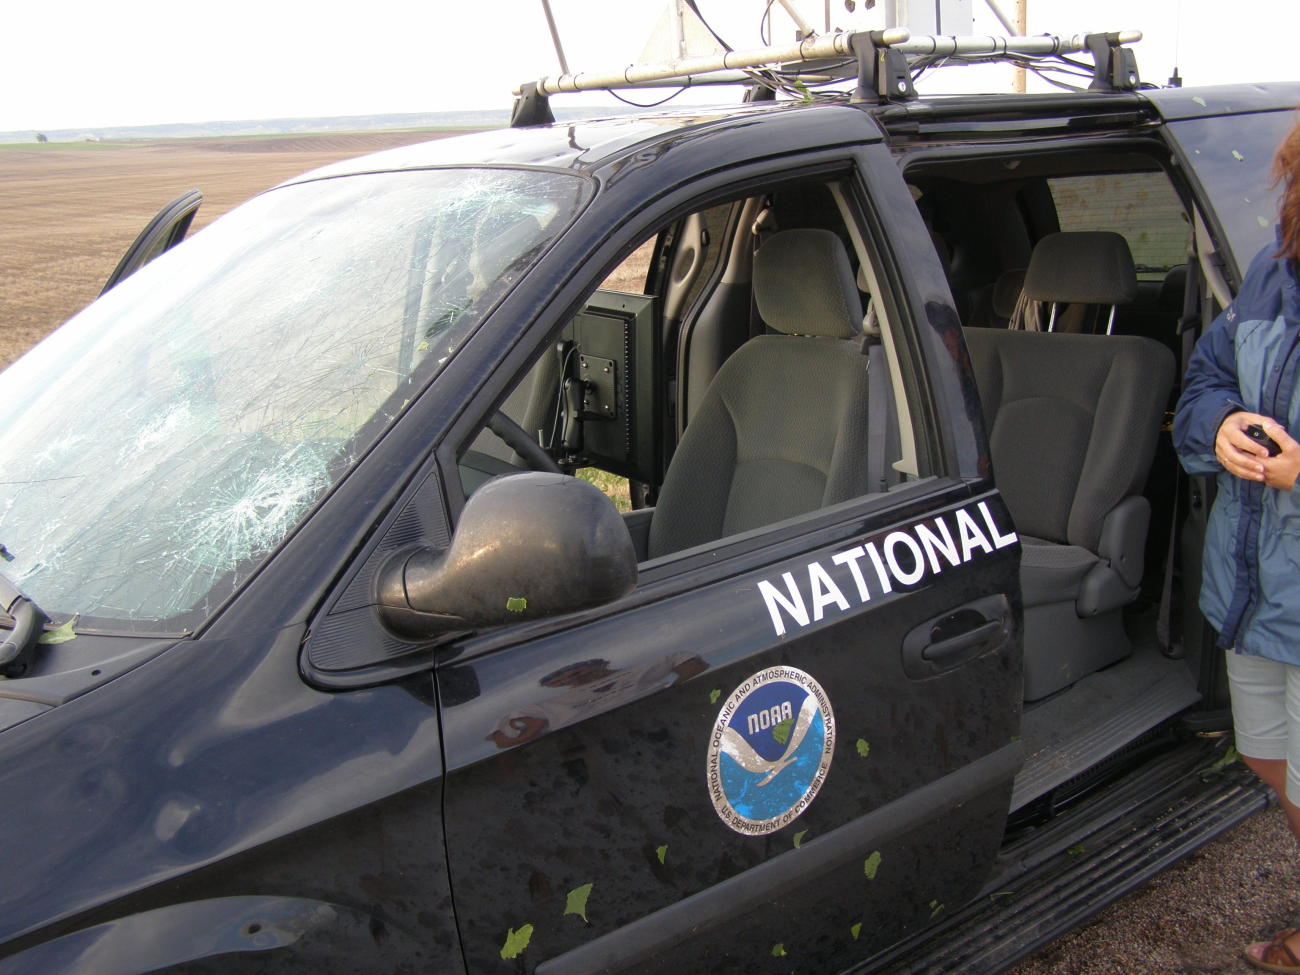 The tornadic storm observed earlier was accompanied by largedangerous hail which smashed the windshield of this National Severe StormsLaboratory instrumented vehicle